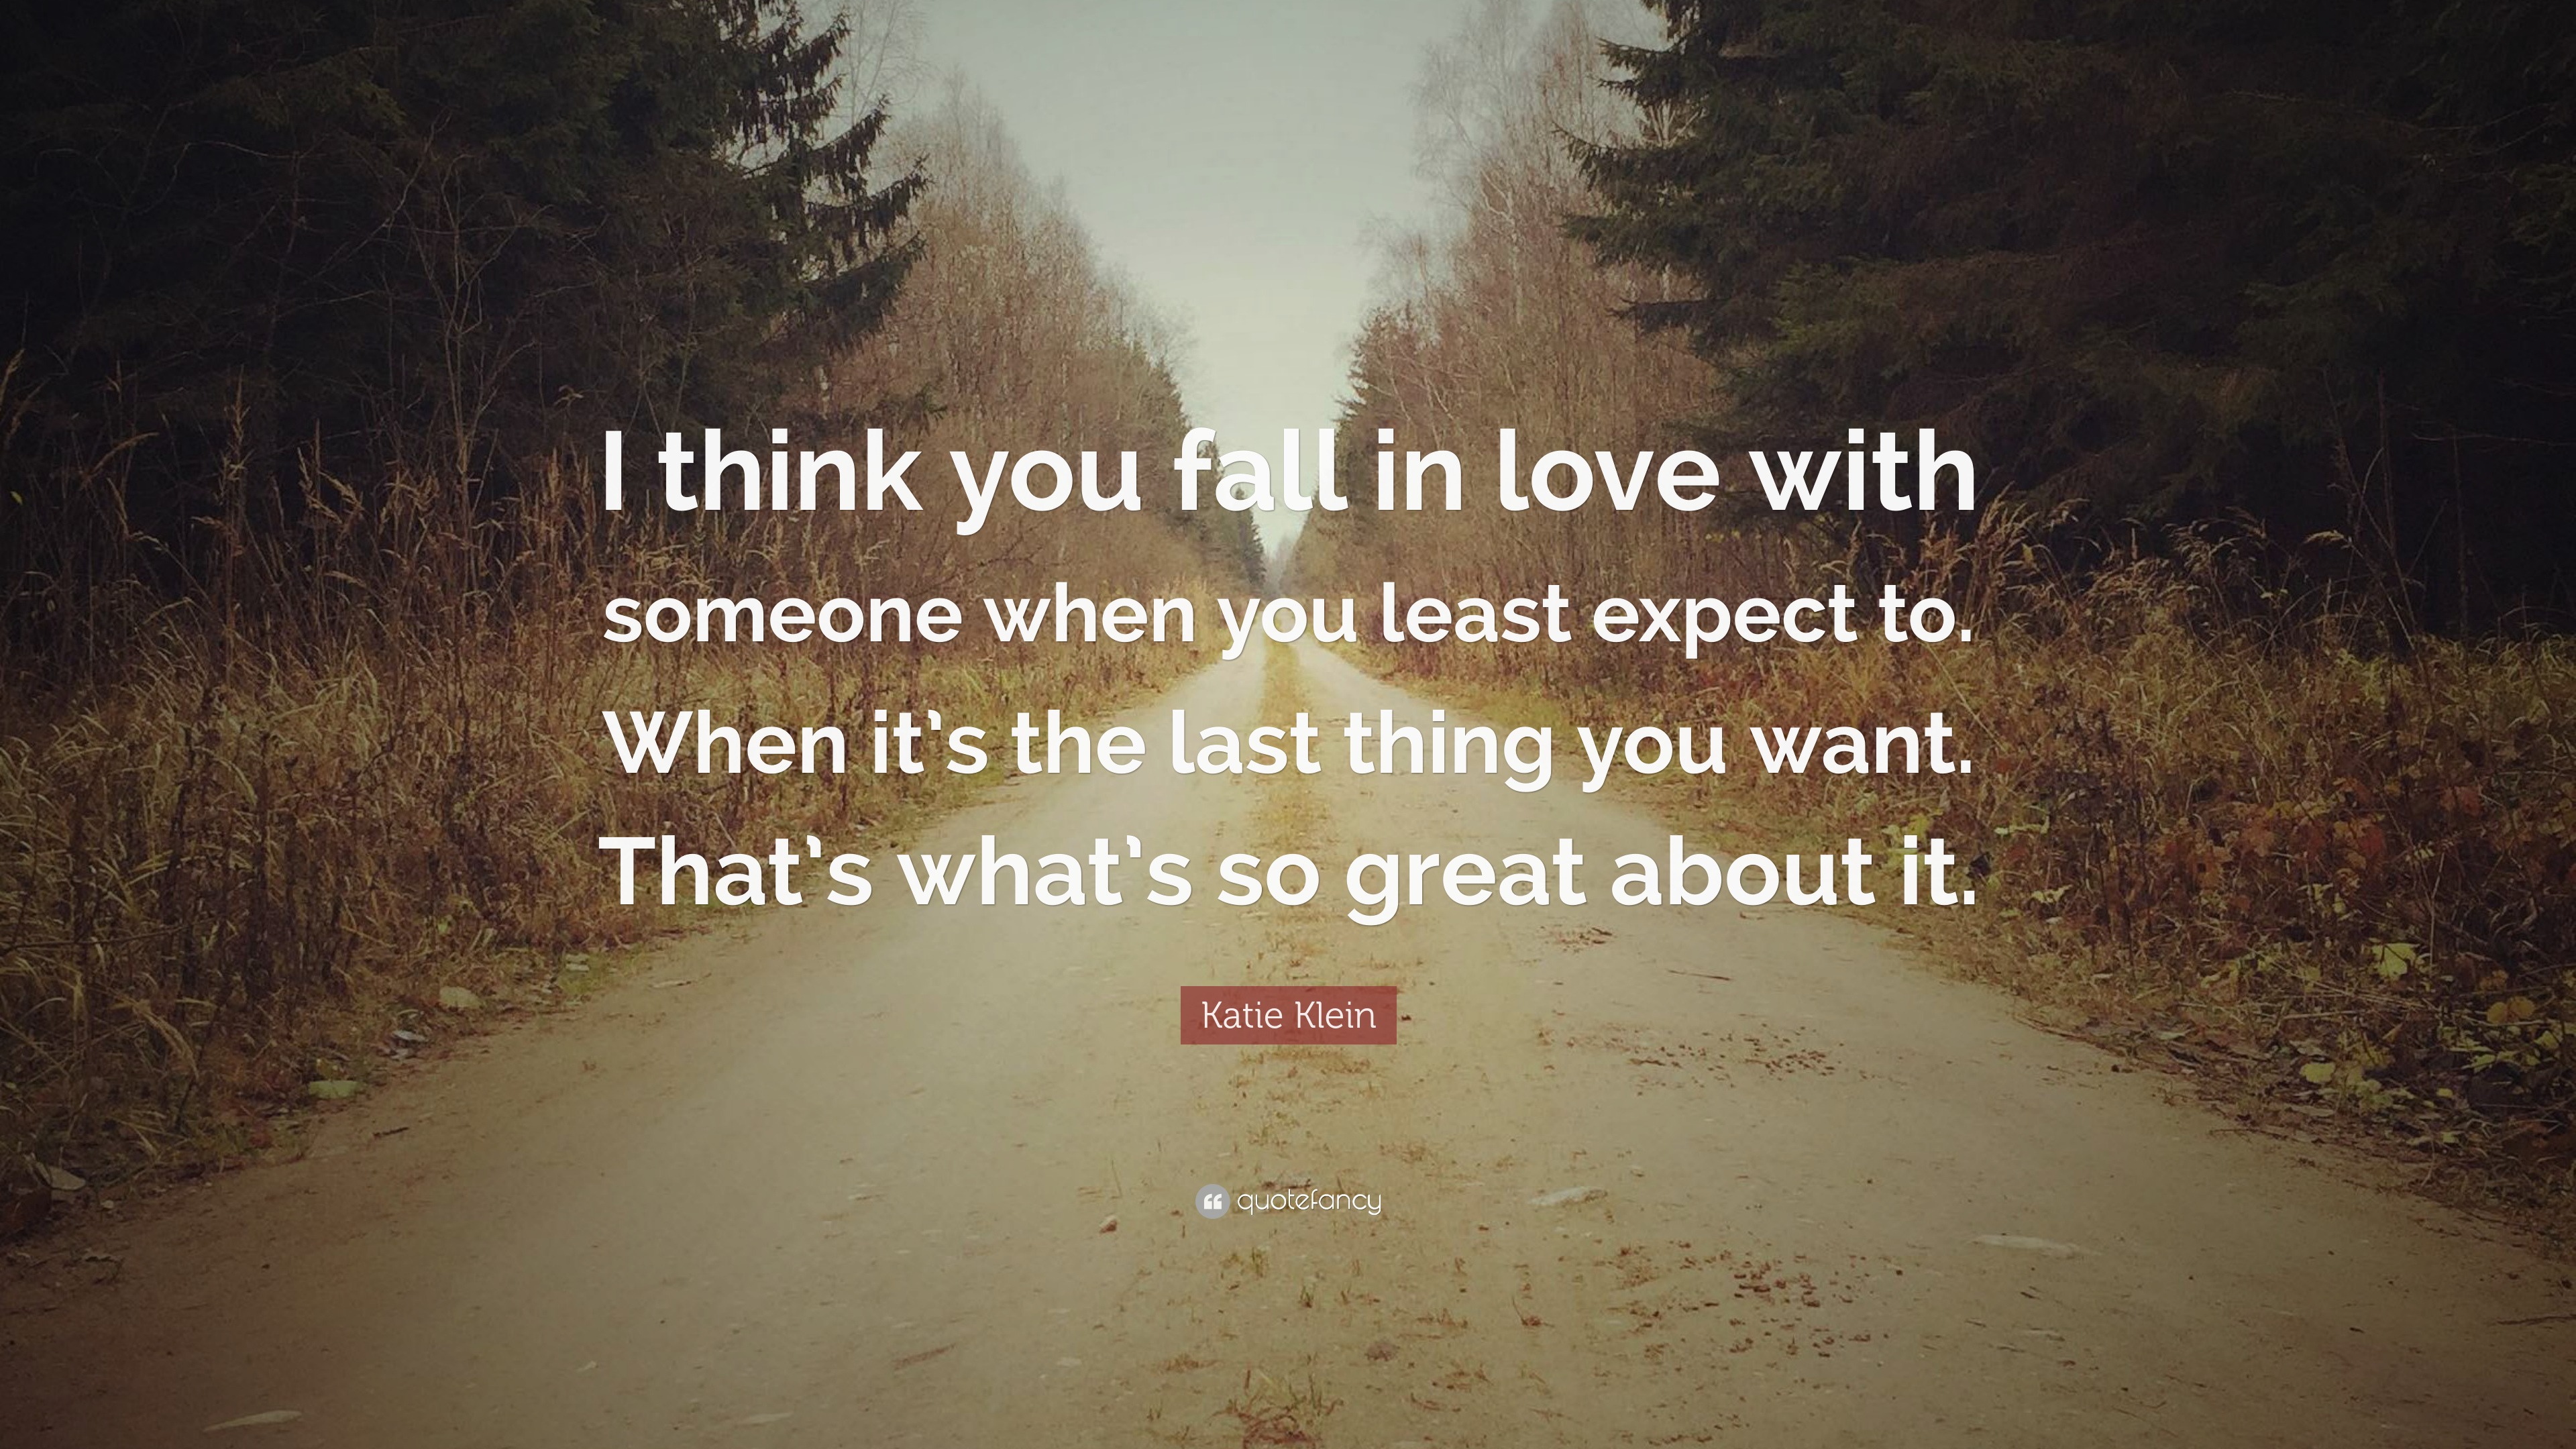 Katie Klein Quote “I think you fall in love with someone when you least